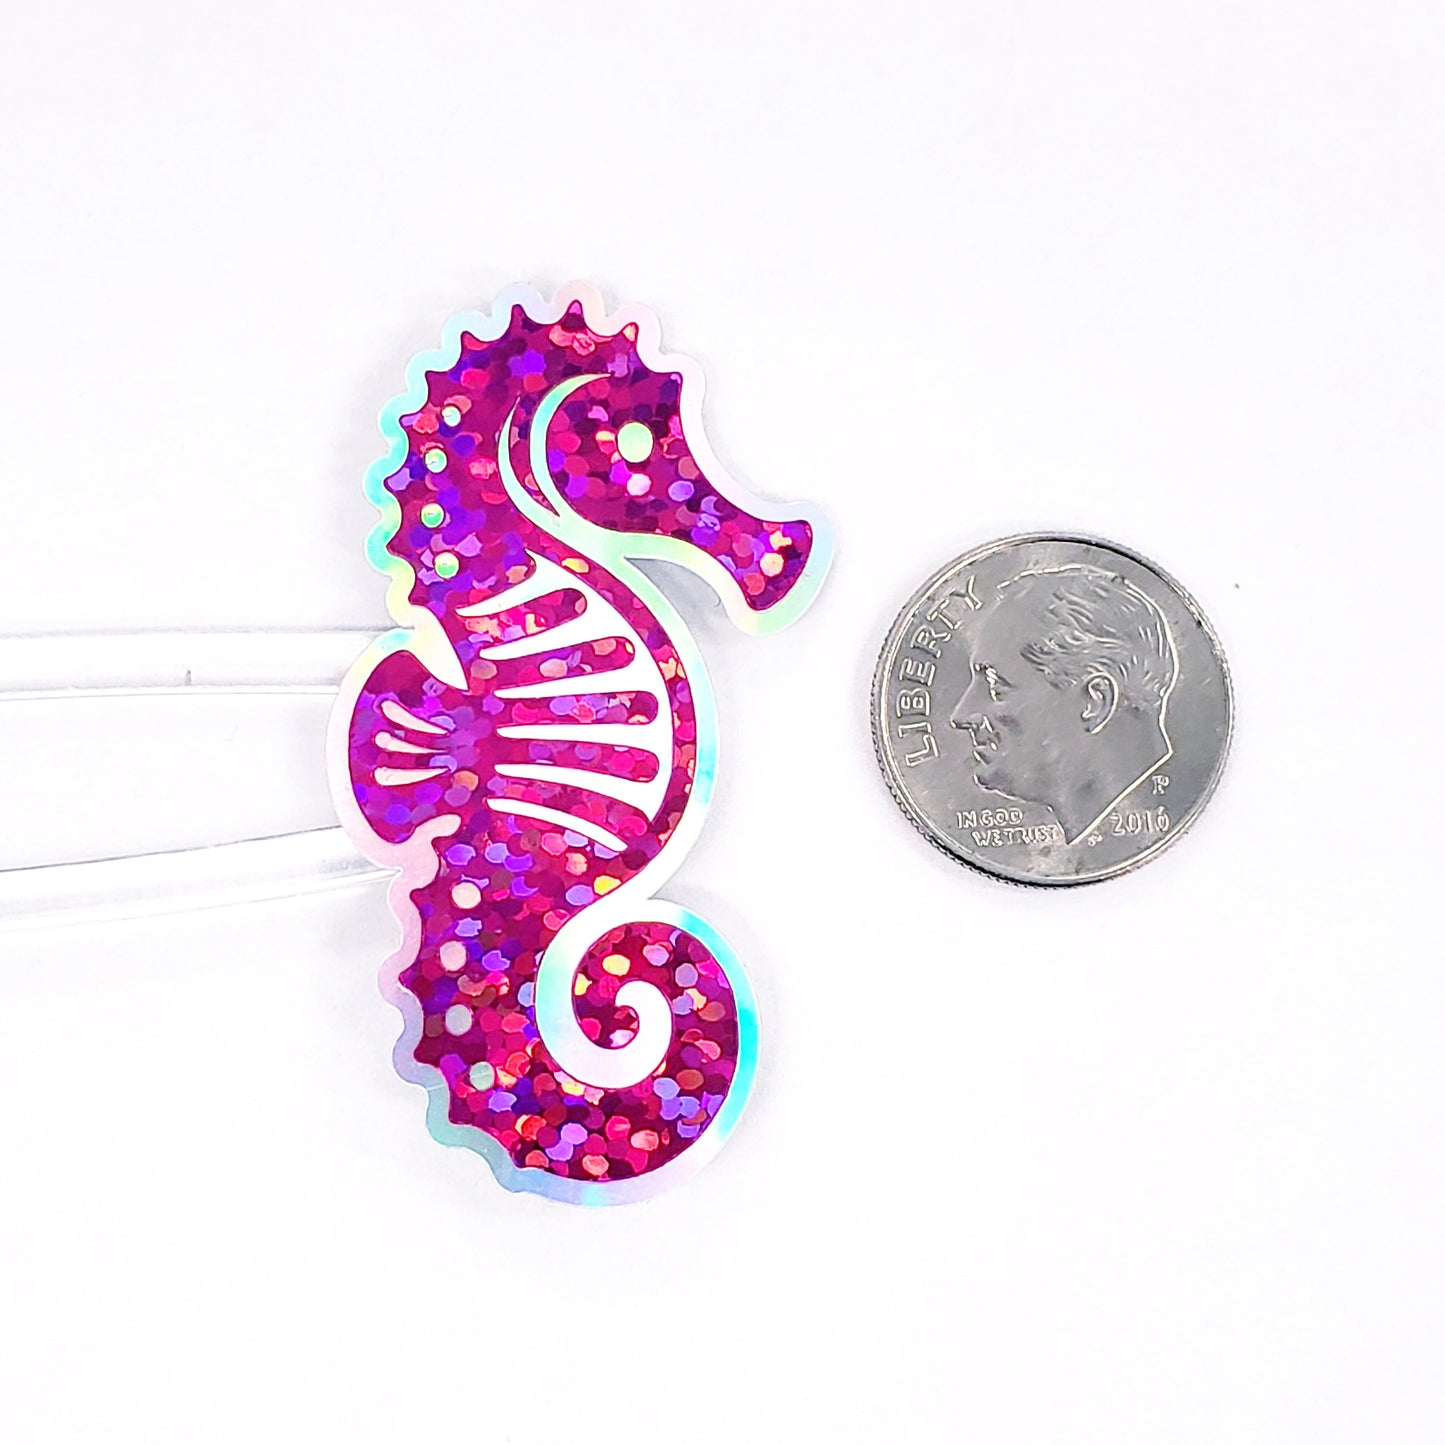 Seahorse Glitter Stickers, set of 12 colorful vinyl stickers for kids, teachers, journals, beach wedding decor, ocean themed small gift.